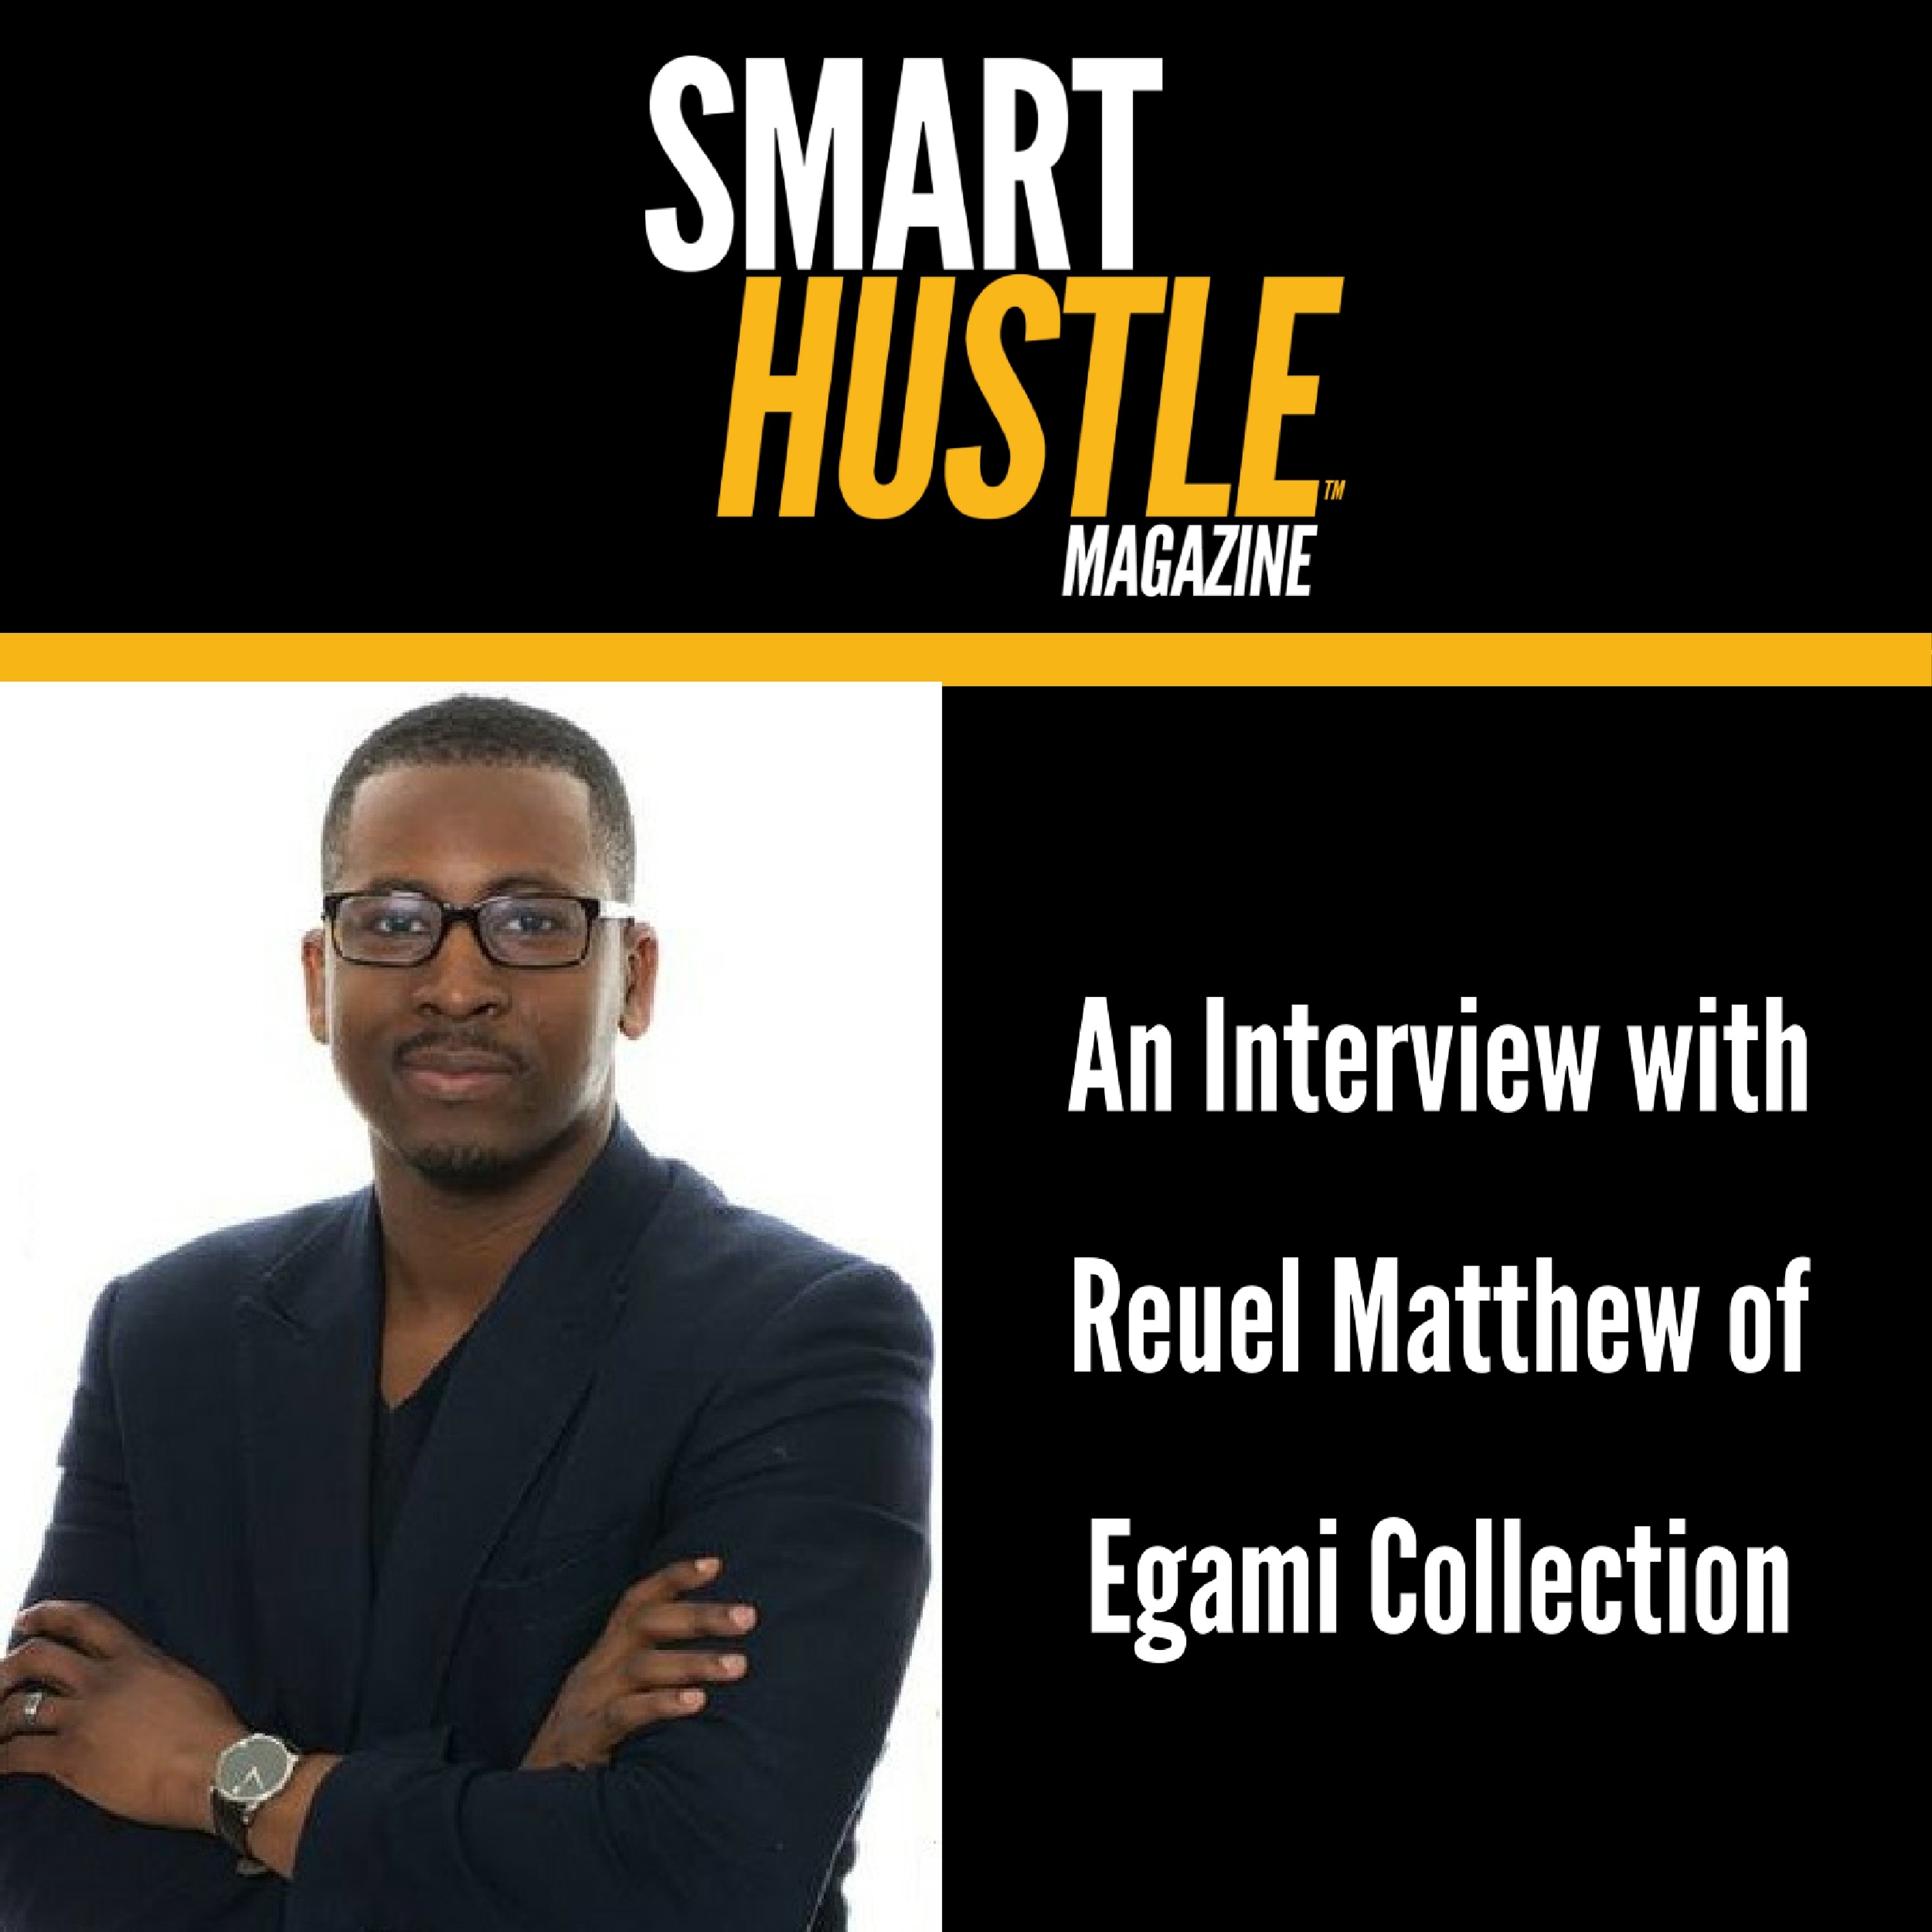 An Exploration of Reuel Matthew’s Image Building Journey with Egami Collection